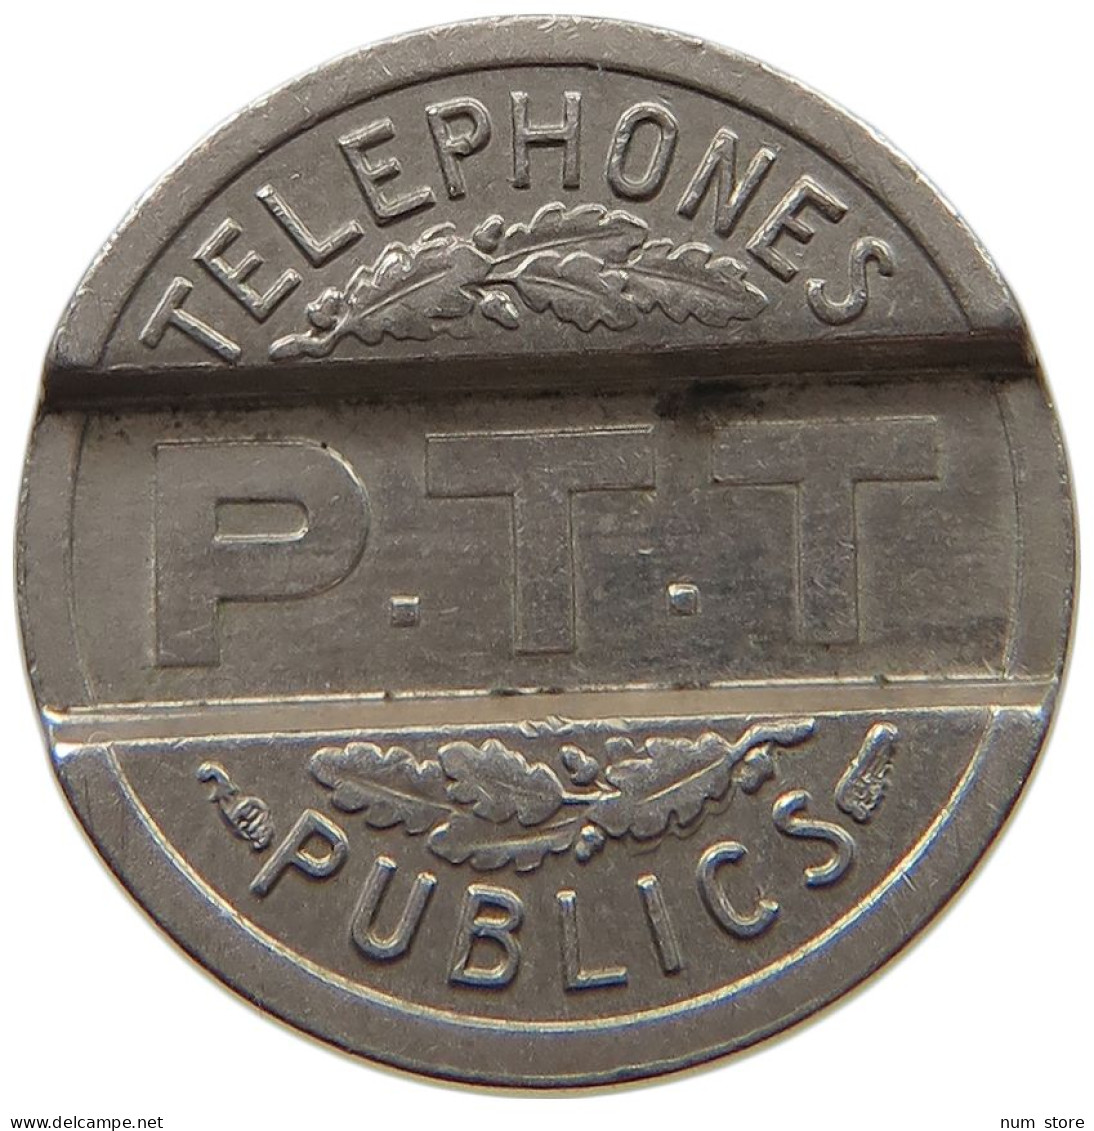 FRANCE PHONE TOKEN 1937 #a090 0453 - 1 Centime